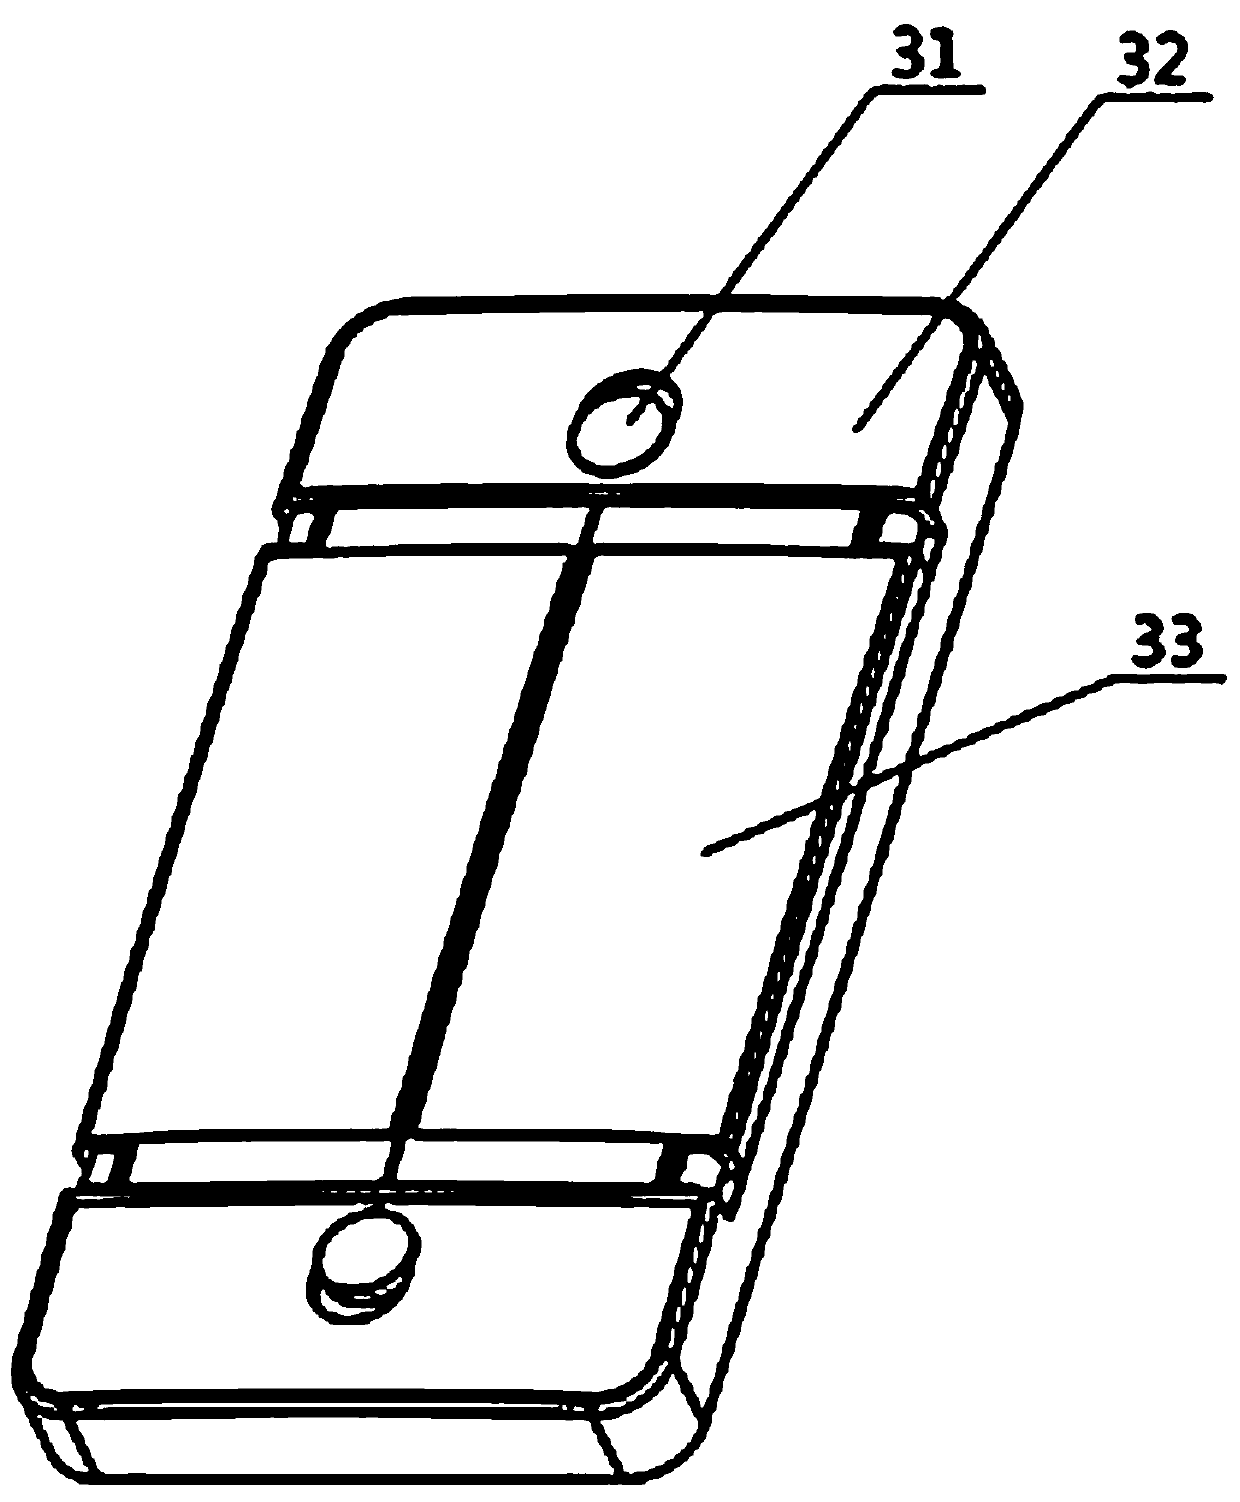 Mobile phone shell embedded light supplementing lamp device